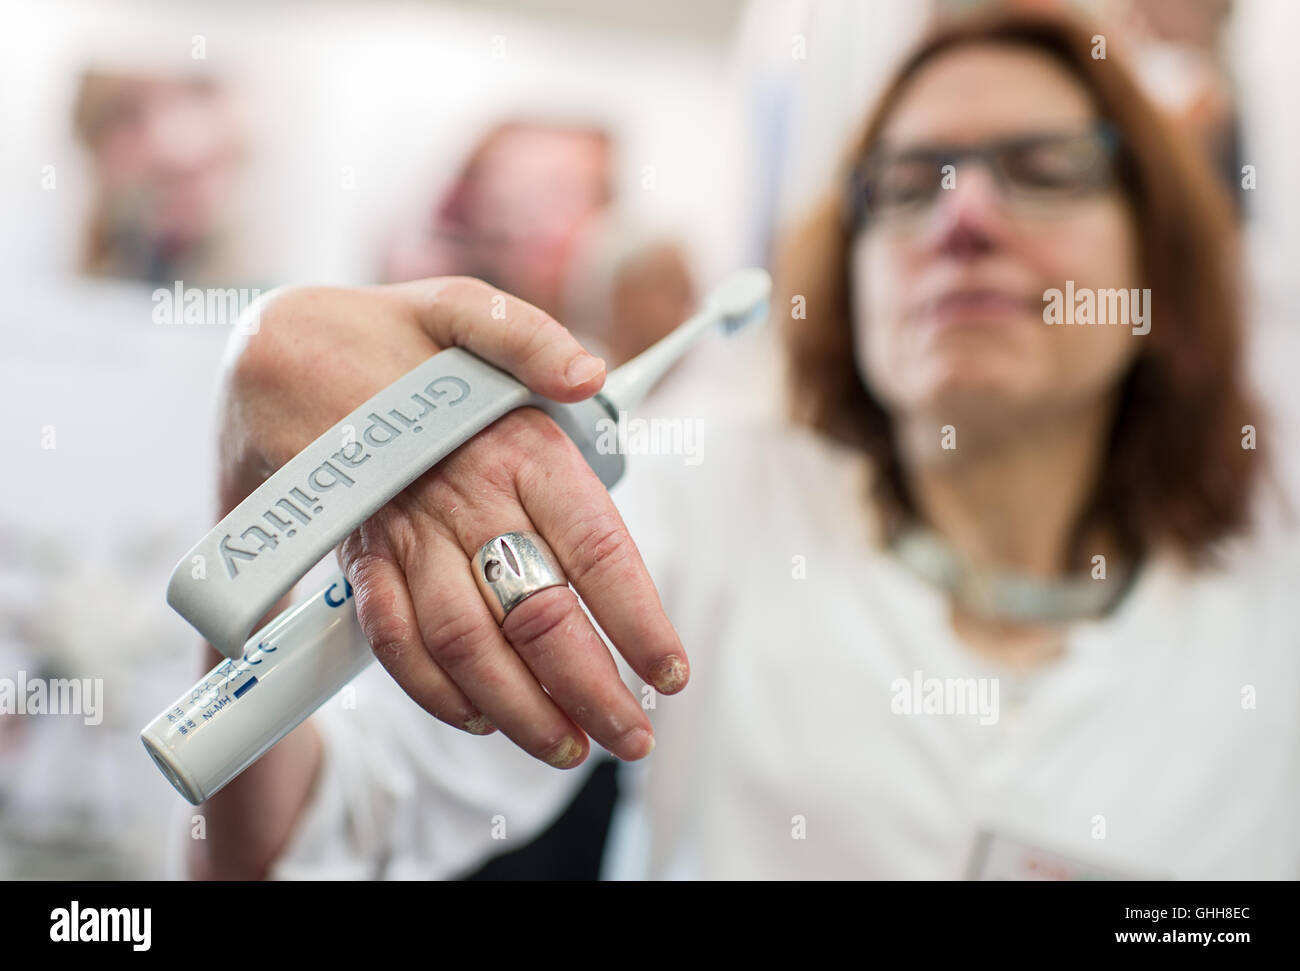 Duesseldorf, Germany. 28th Sep, 2016. A woman holding up a so-called 't.brush' during the opening of the international care fair 'Rheacare' in Duesseldorf, Germany, 28 September 2016. The 't.brush' is a handle for electrical toothbrushes. The fair runs until 1 October 2016. PHOTO: WOLFRAM KASTL/dpa/Alamy Live News Stock Photo